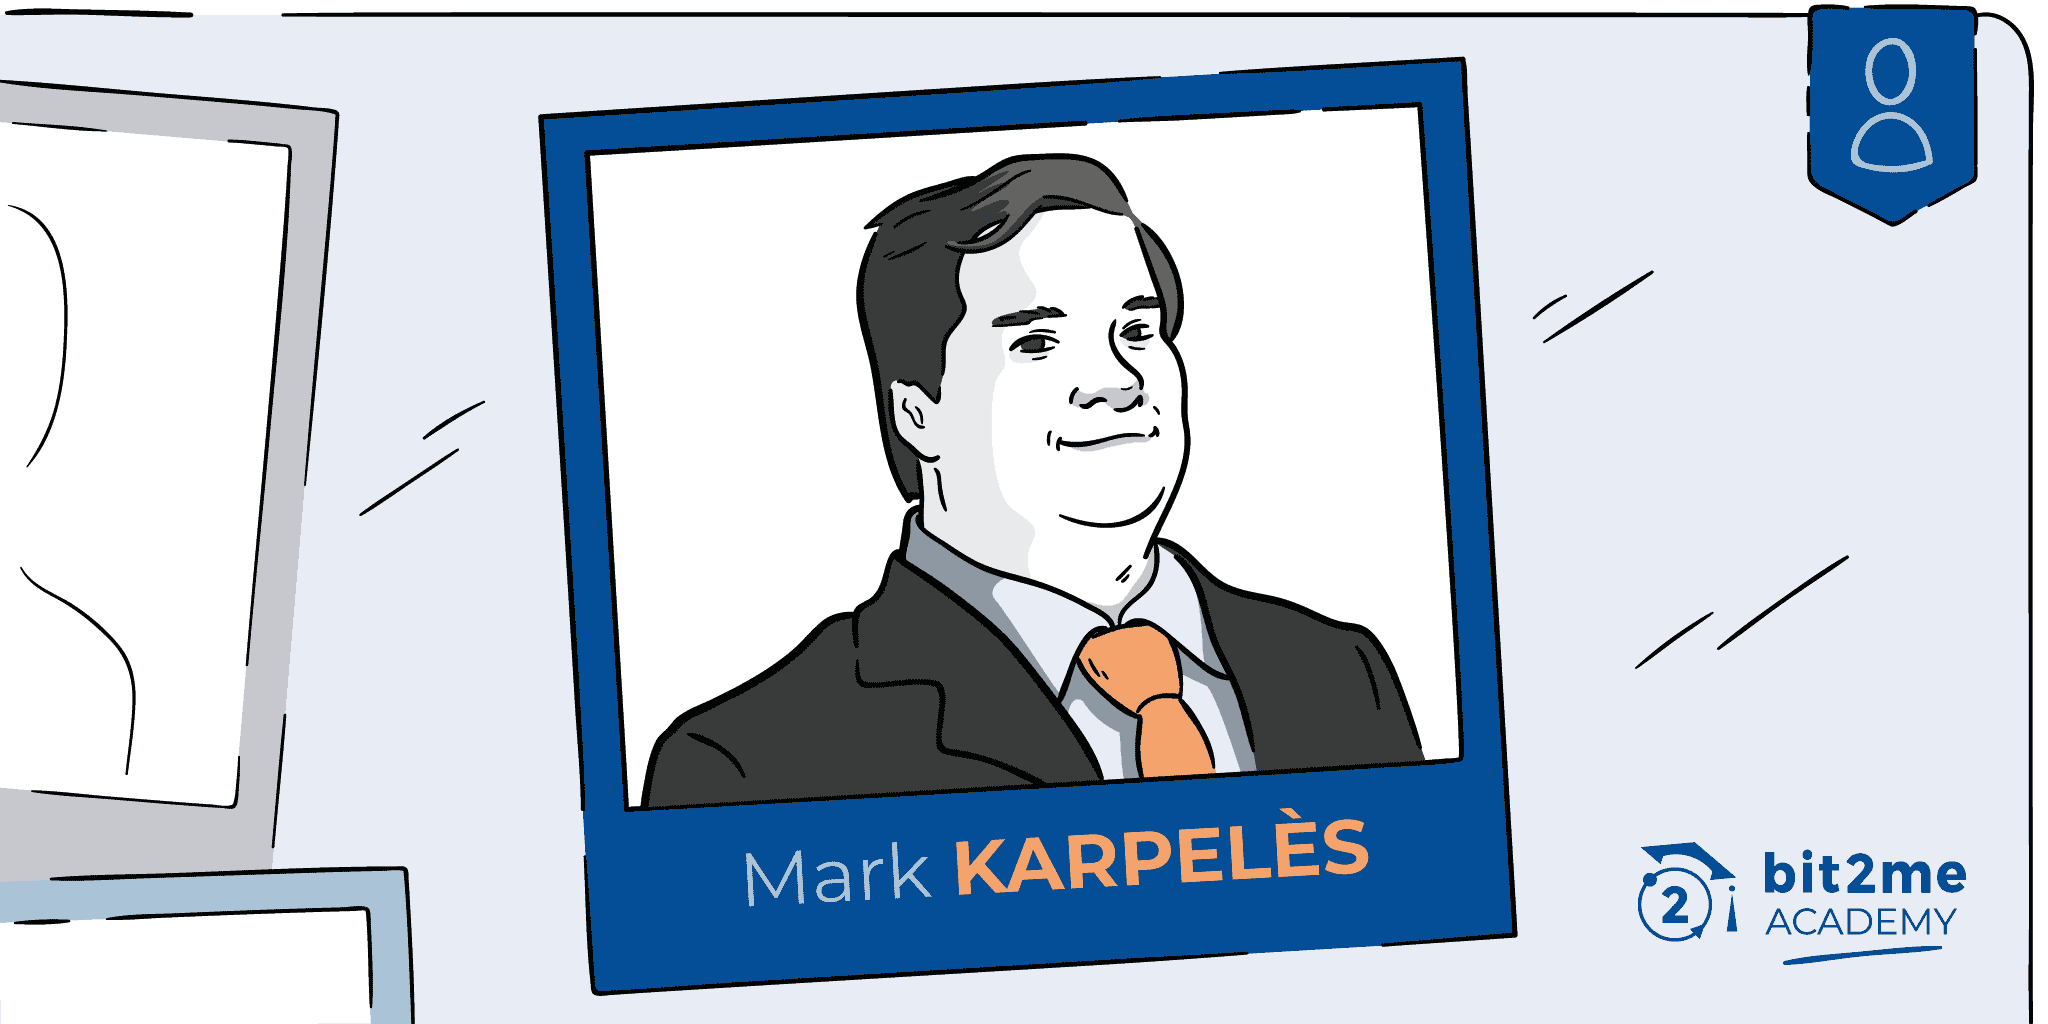 who is mark karpeles